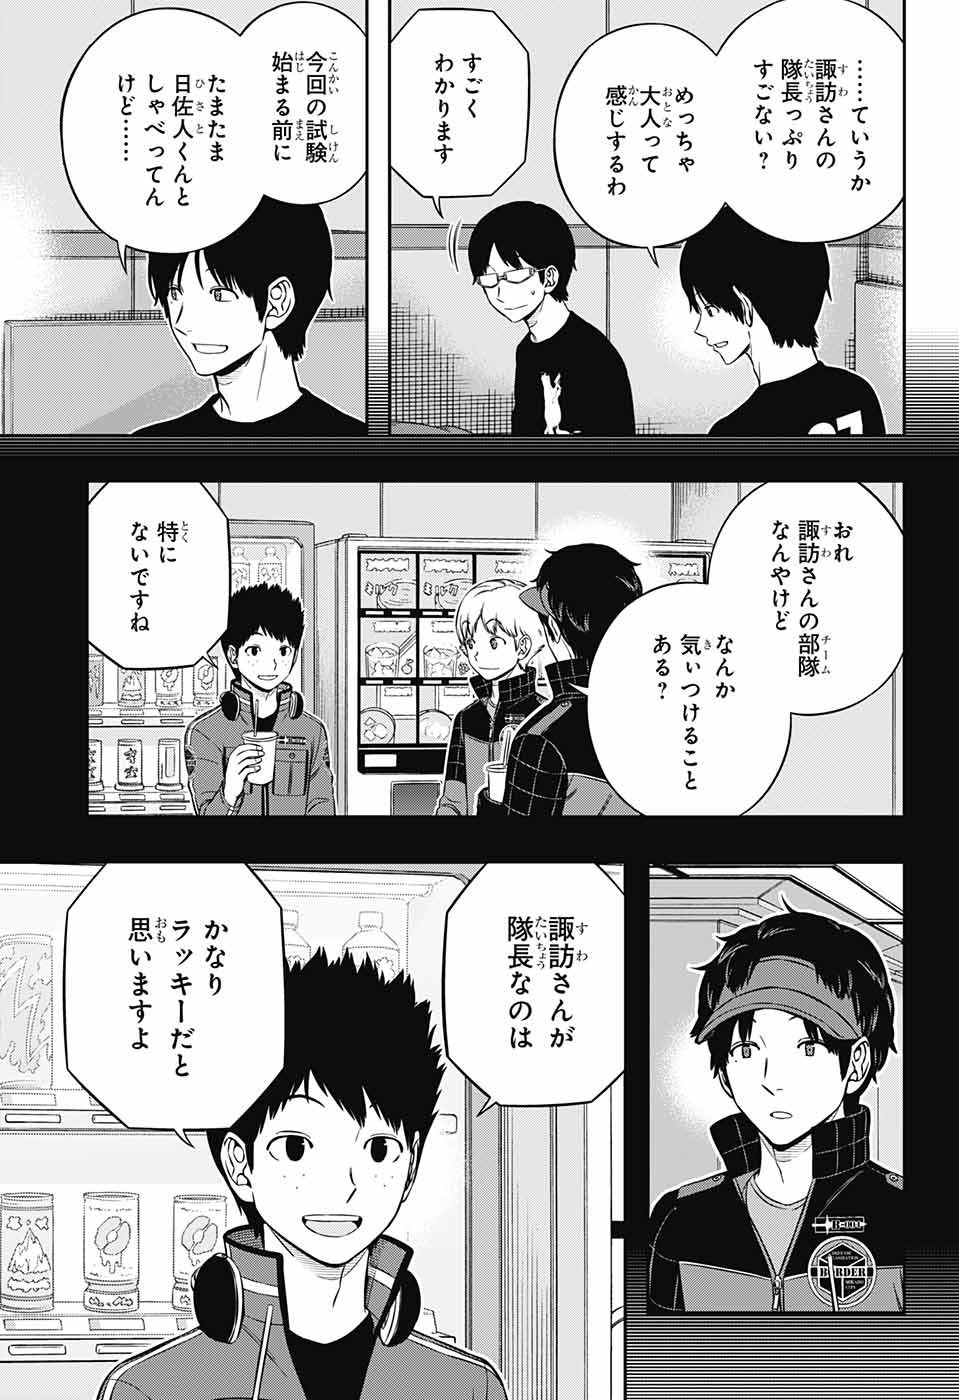 World Trigger - Chapter 222 - Page 17